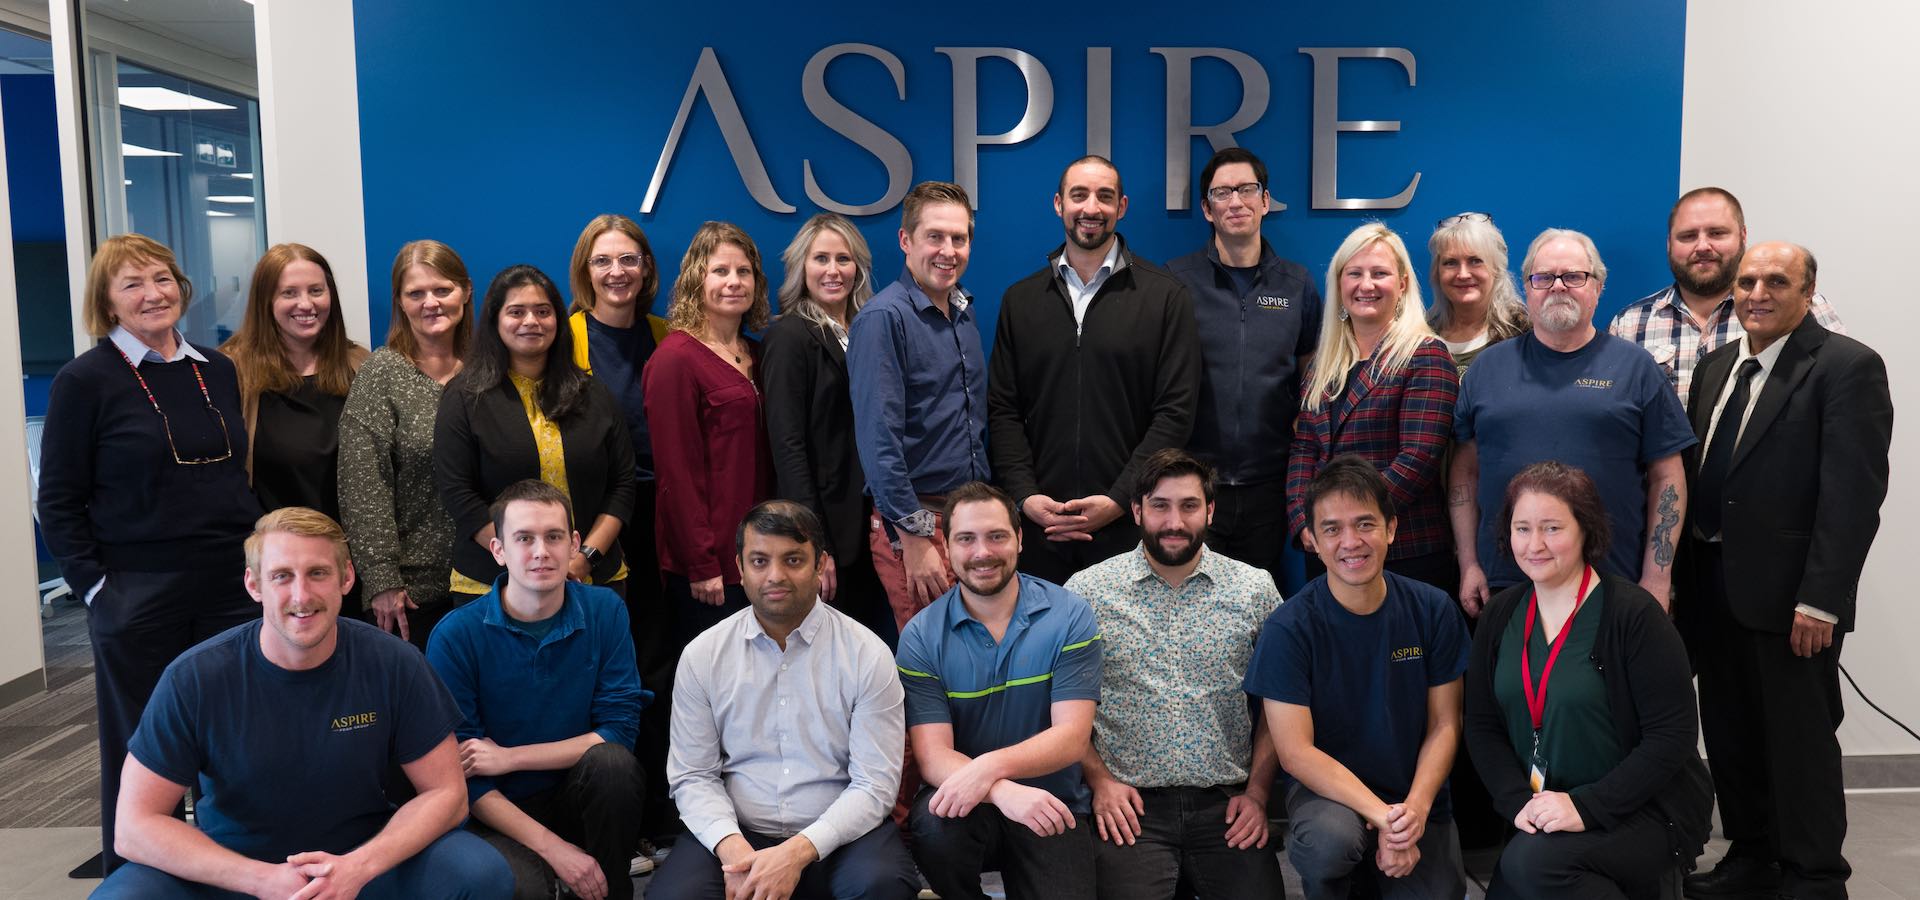 Aspire Food Group employees are pictured together at Aspire office.